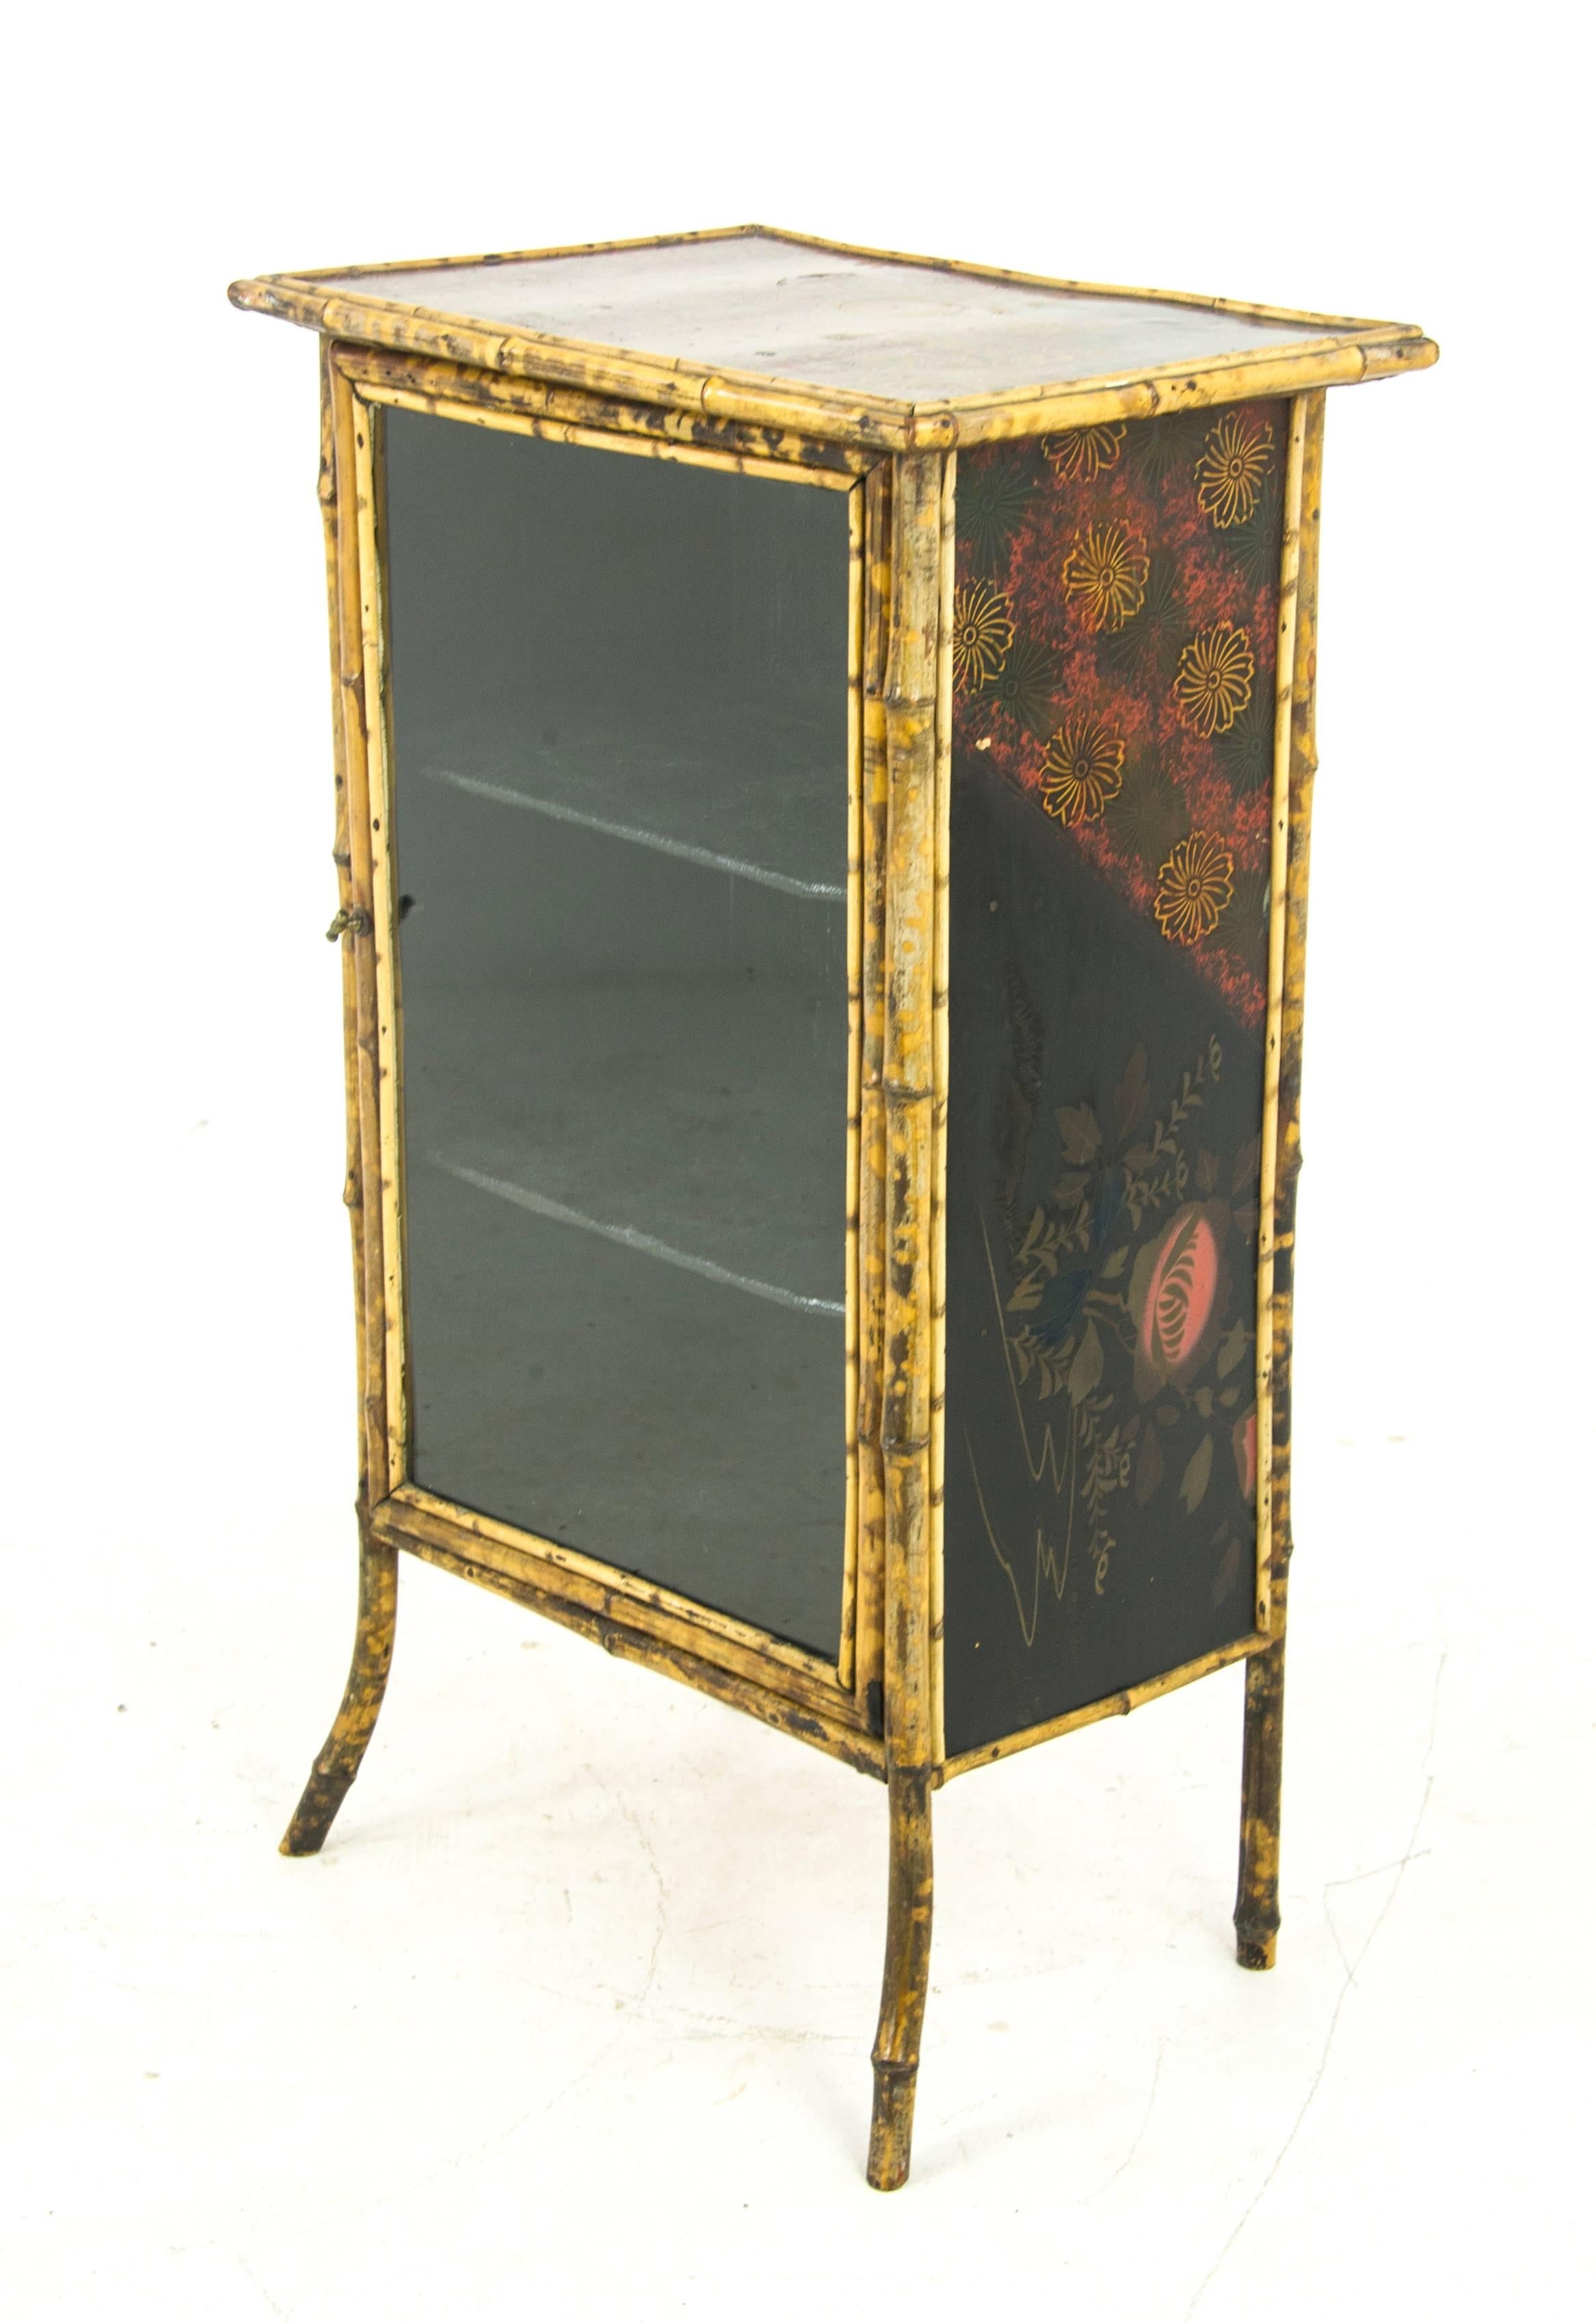 Scottish Bamboo Furniture, Antique Display Cabinet, Bamboo Bookcase, Scotland1880 REDUCED!